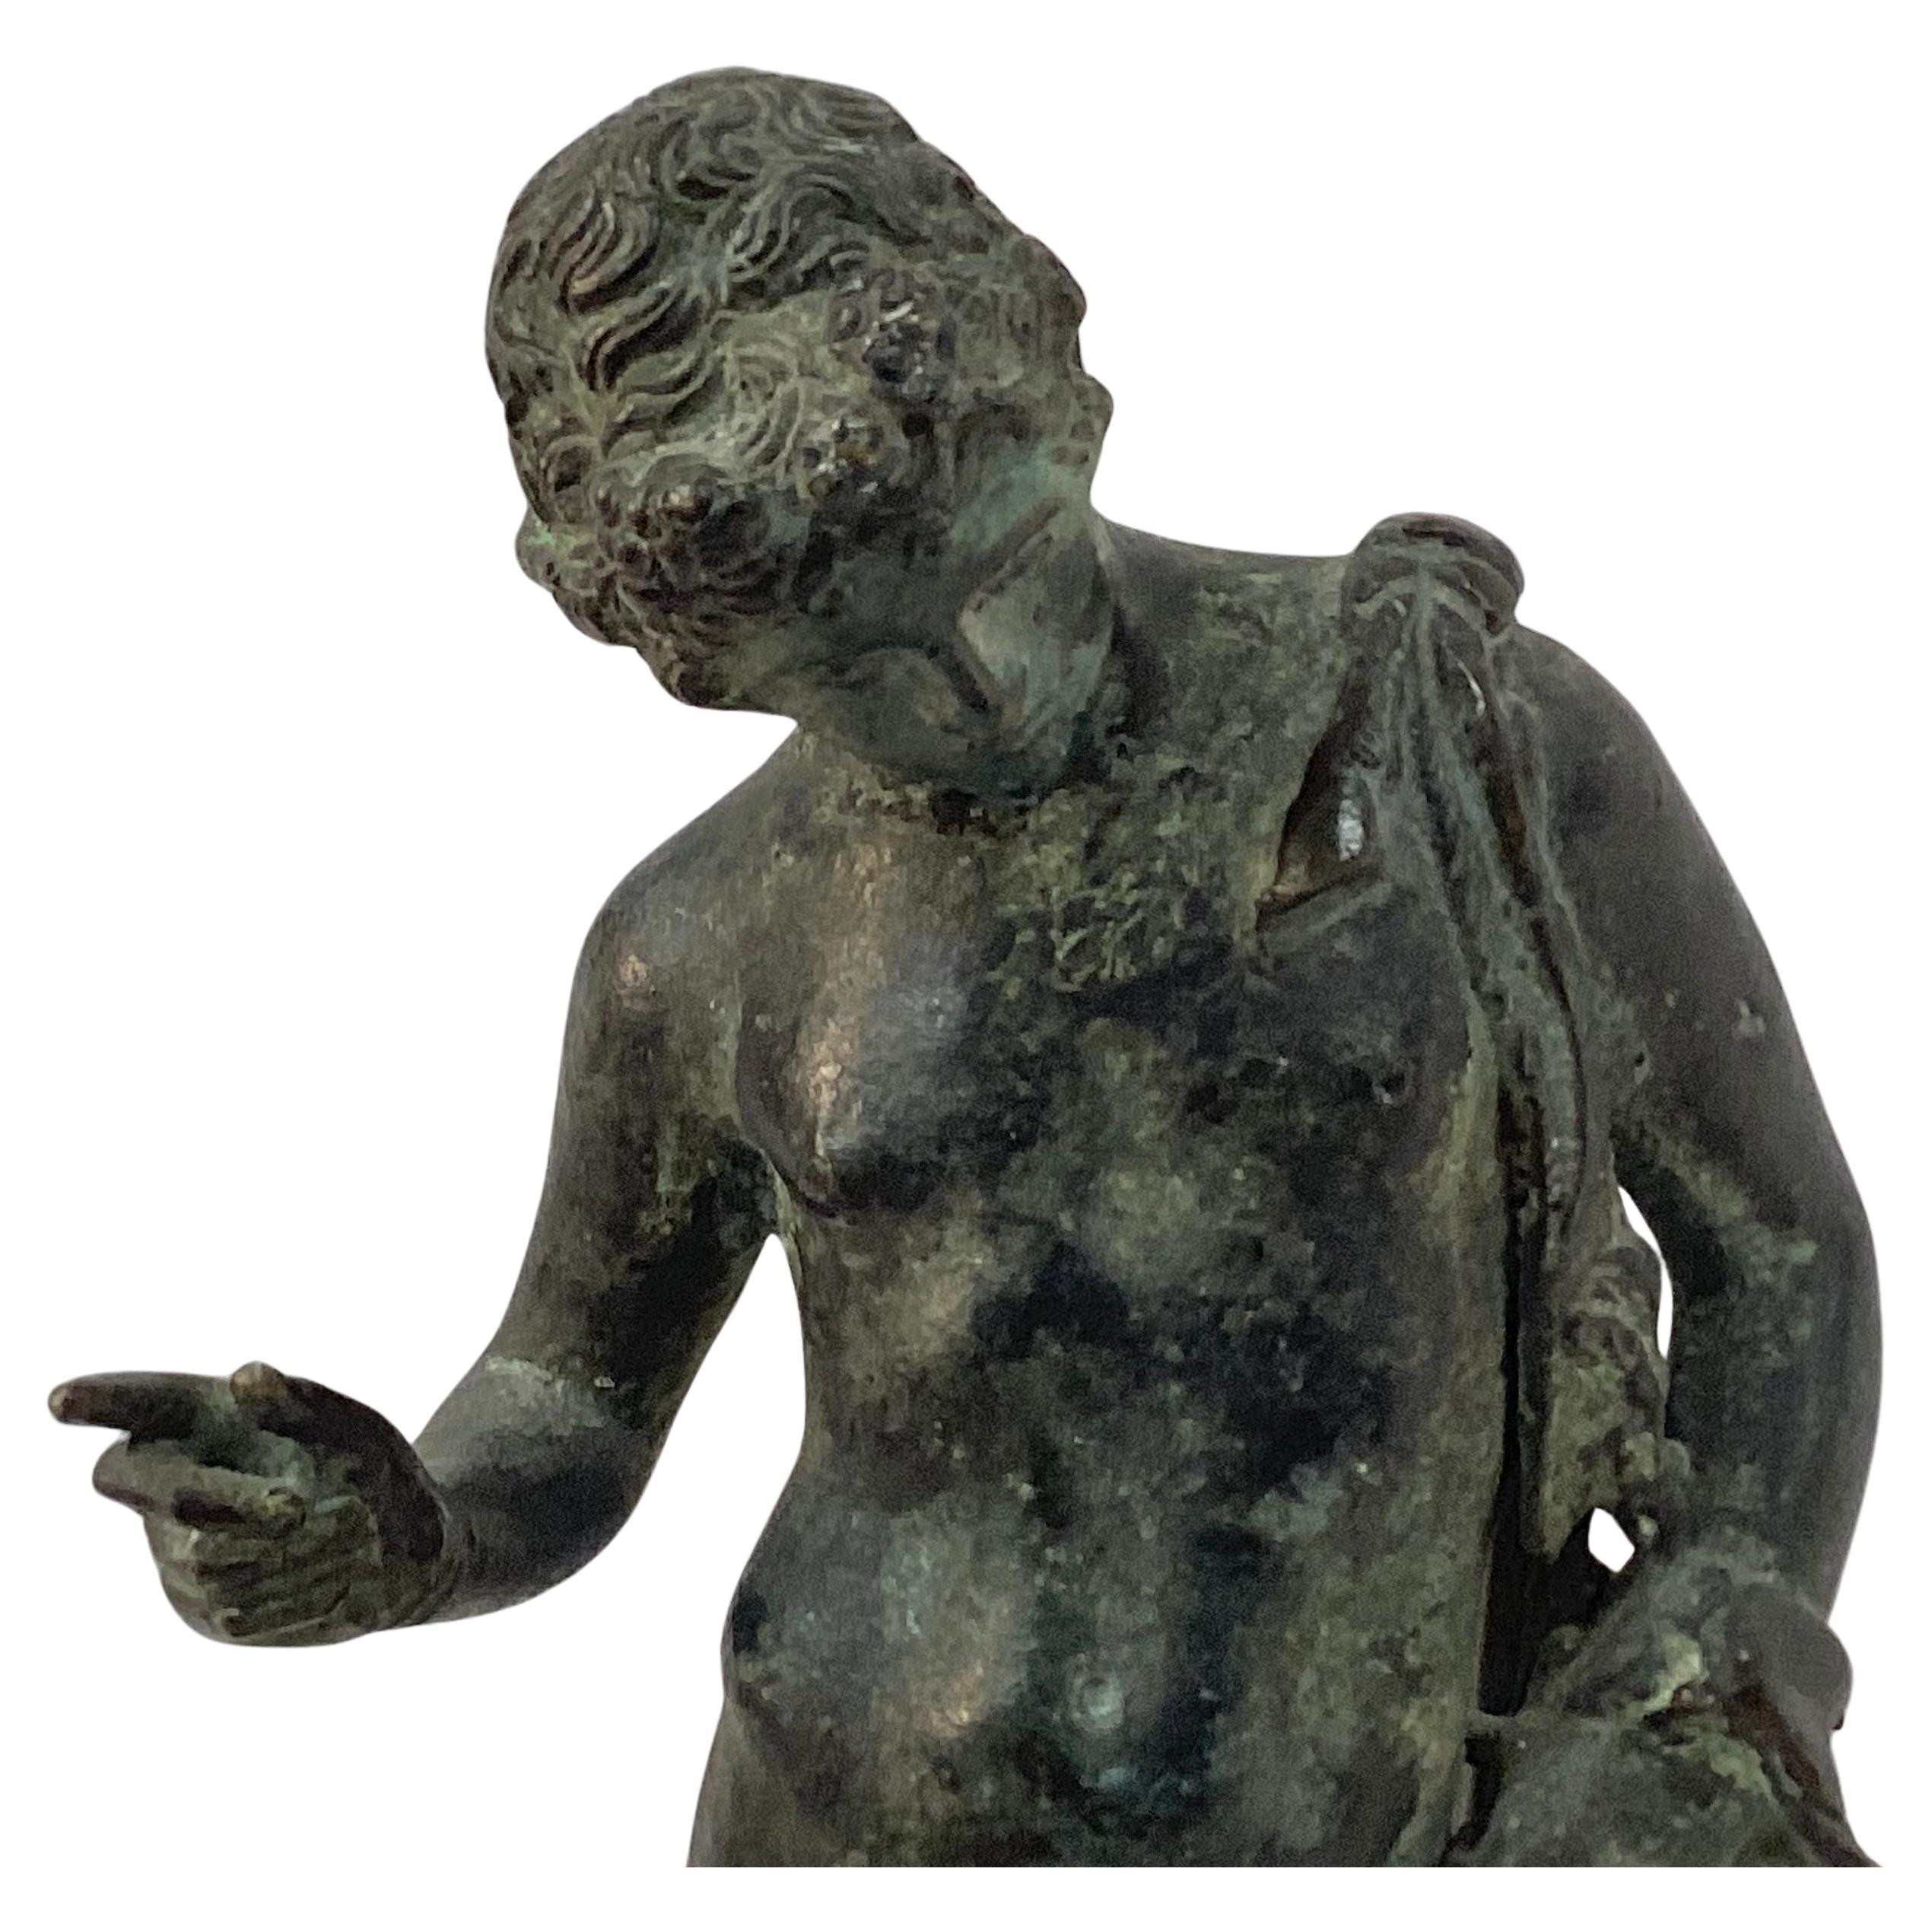 Italian Classical bronze sculpture of Narcissus with a verdigris patina, believed to by Chiurazzi, or a similar foundry, Naples, circa 1900.

Narcissus is shown nude except for a pair of sandals, standing on a circular plinth with his head bowed and